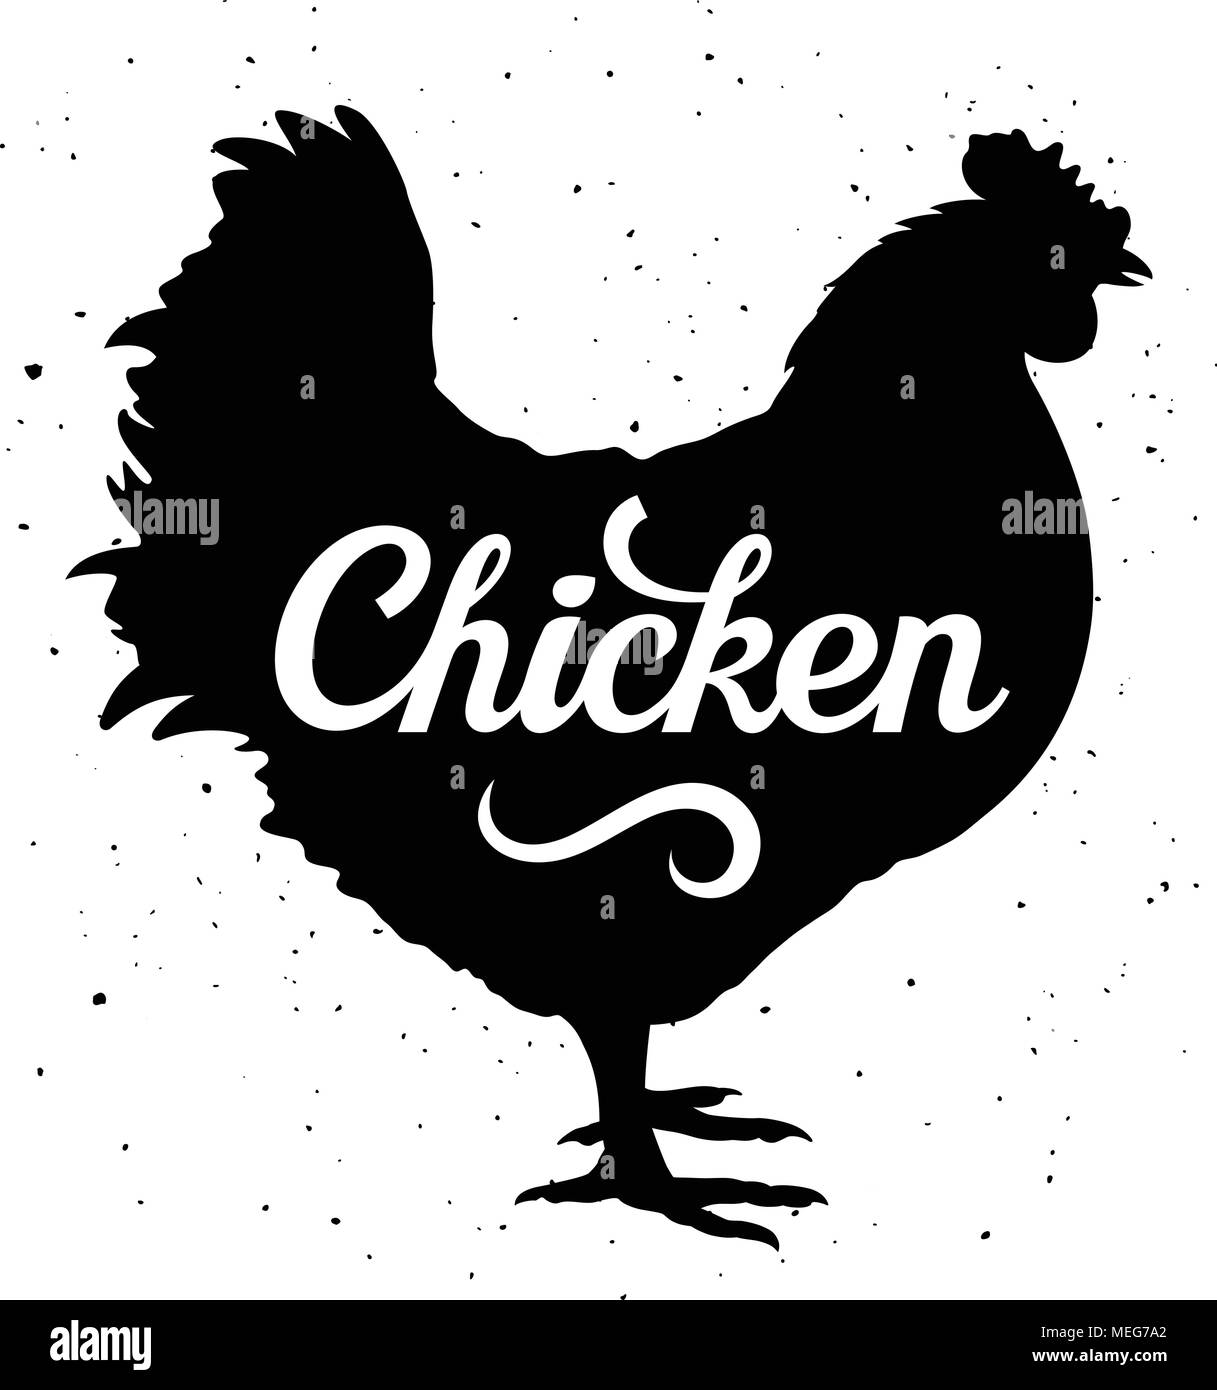 Chicken silhouette with a calligraphic inscription 'Chicken' on a grunge background. Vector illustration Stock Vector